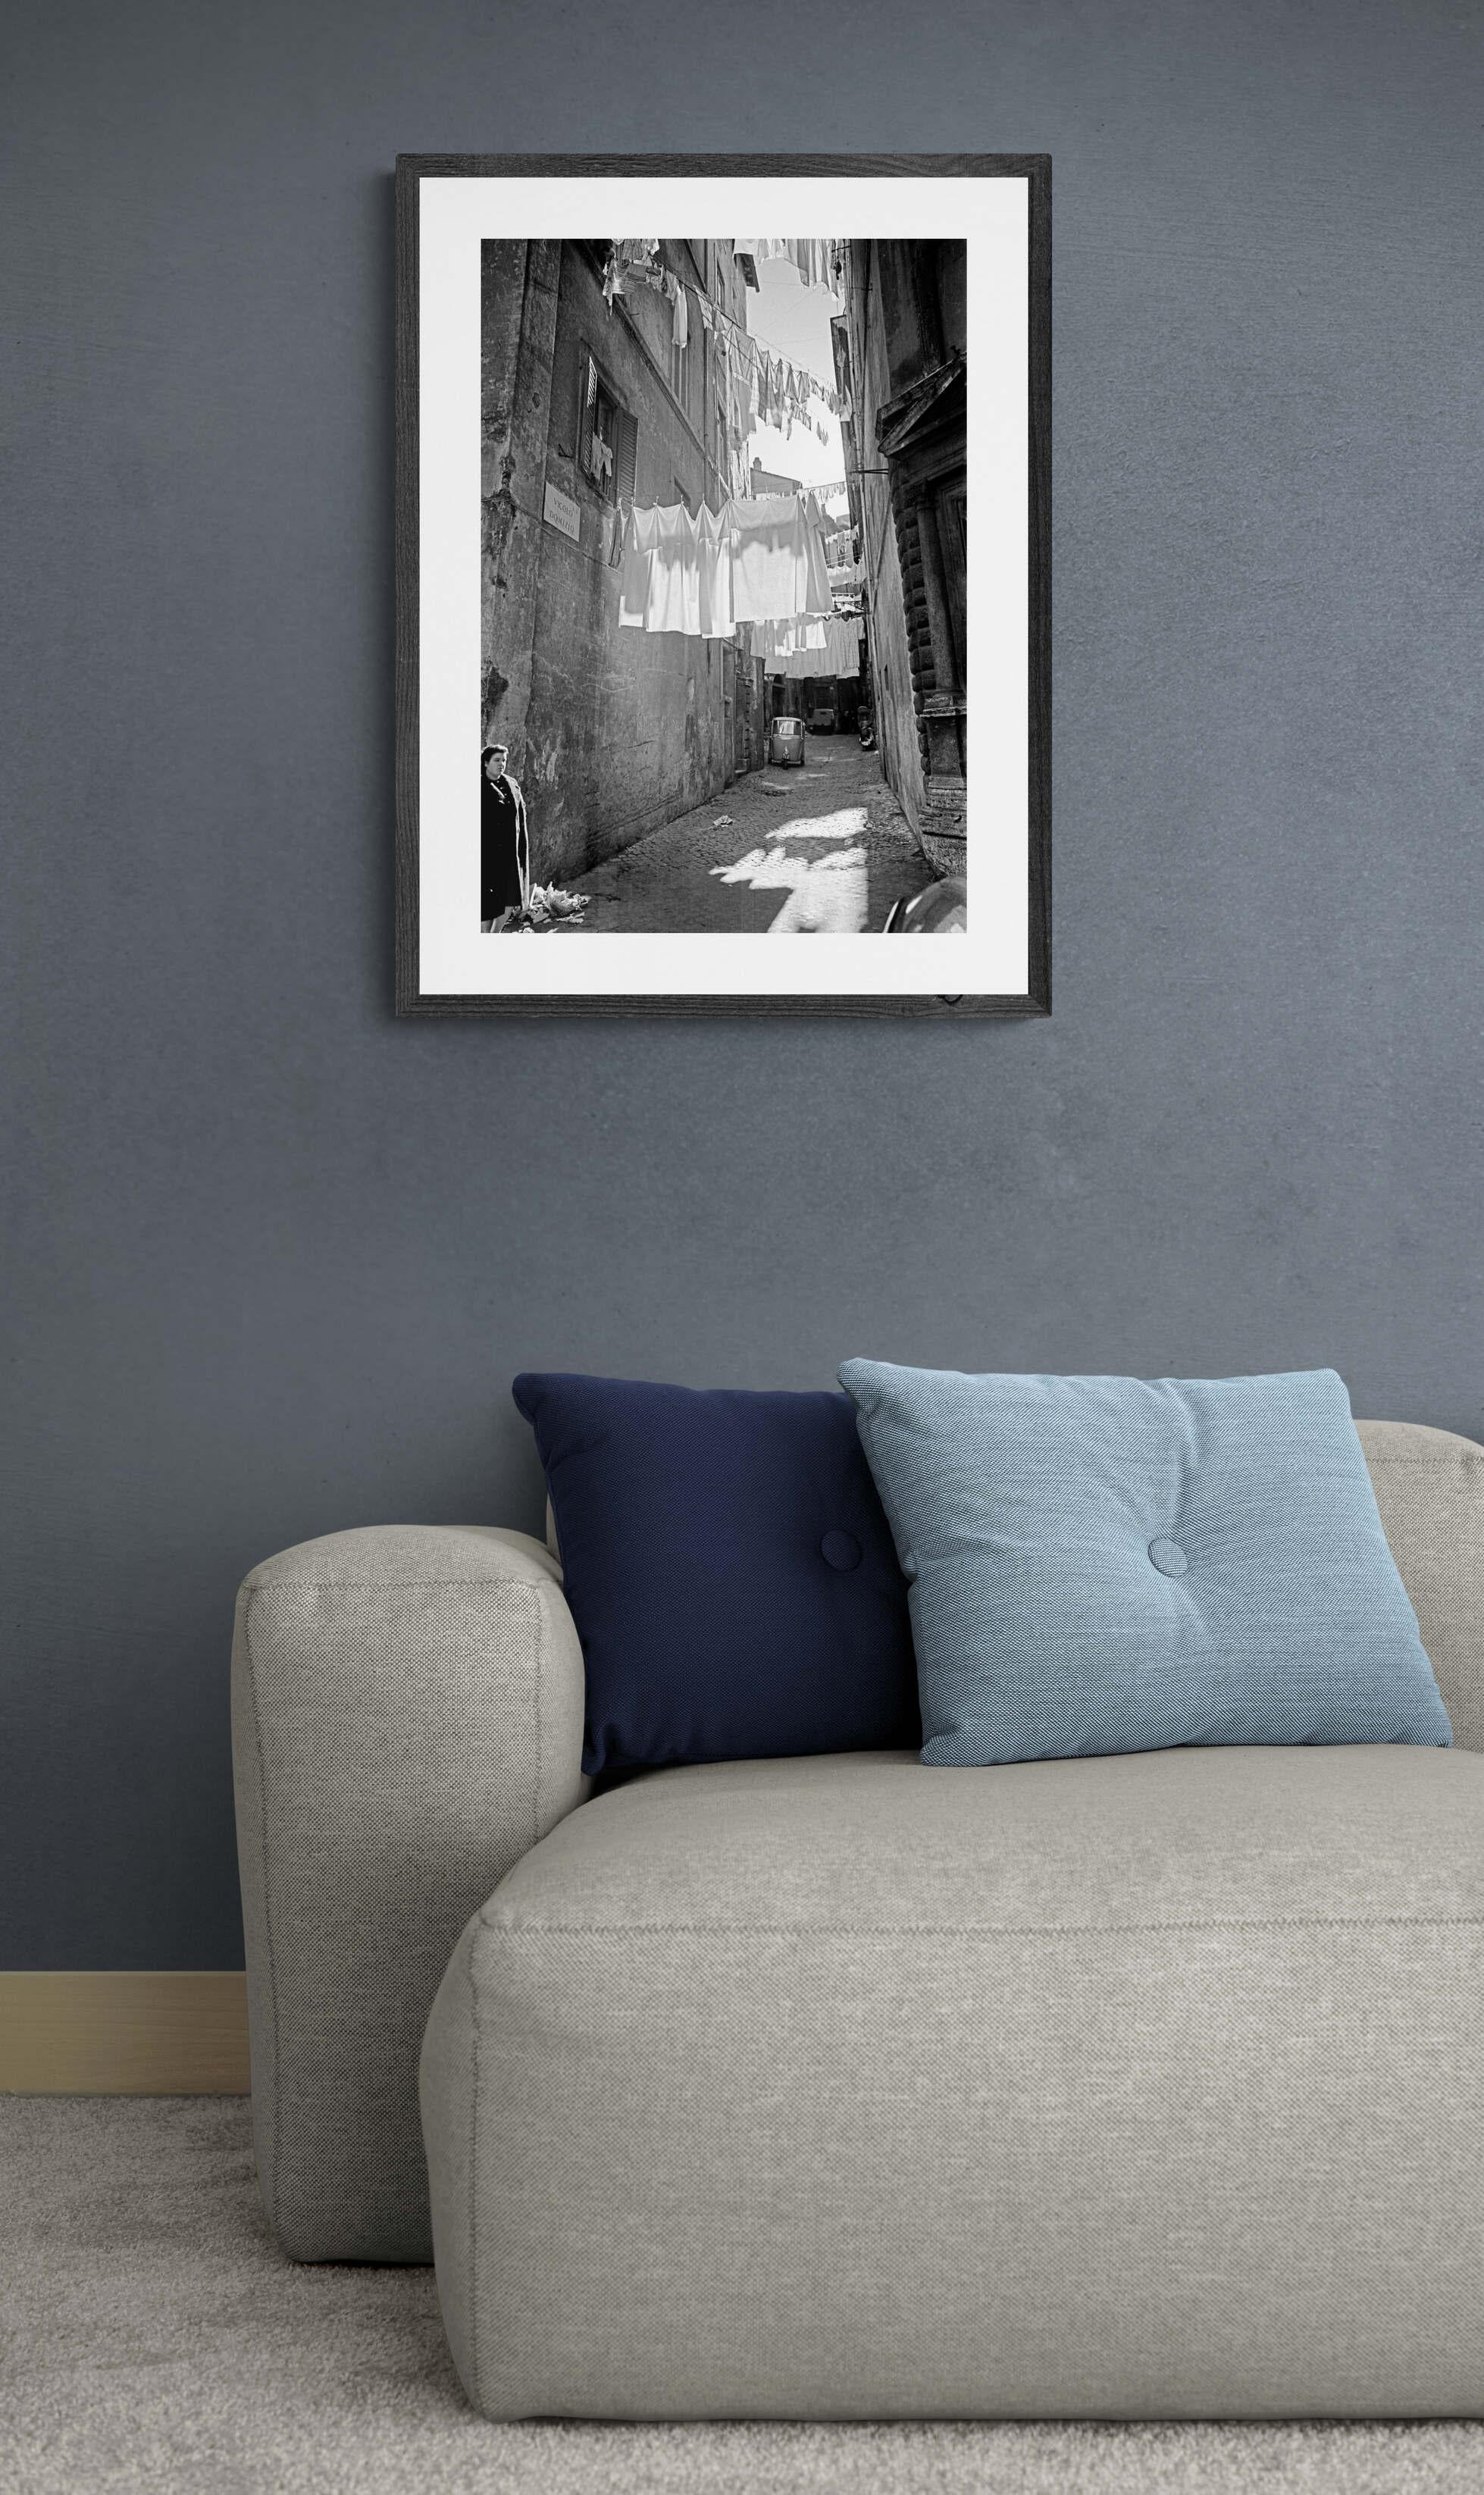 L'Attesa - Roma - # 5 on 5 - Contemporary Photorealist Black & White Photography For Sale 2